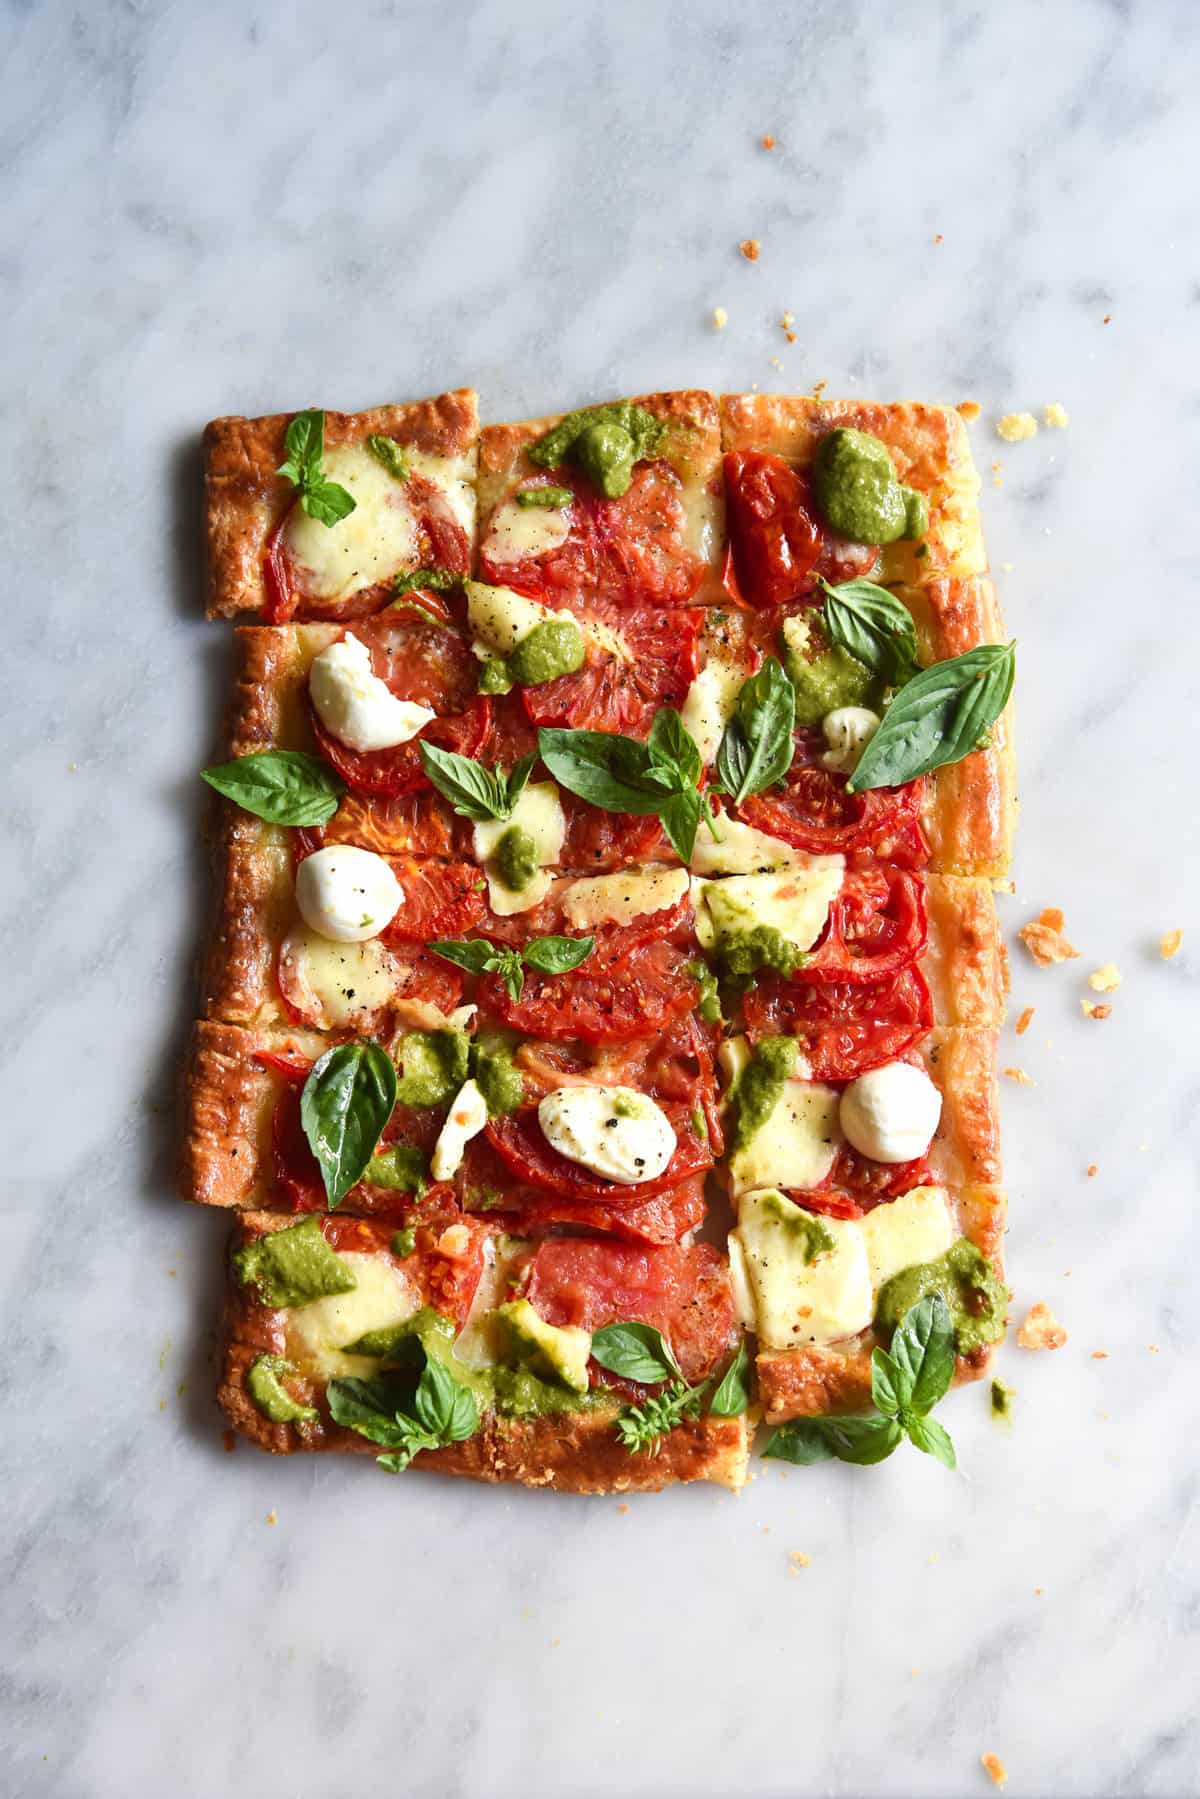 Gluten free tomato tart with gruyere and pesto. Gluten free, vegetarian, FODMAP friendly and easily adapted to be nut free. 